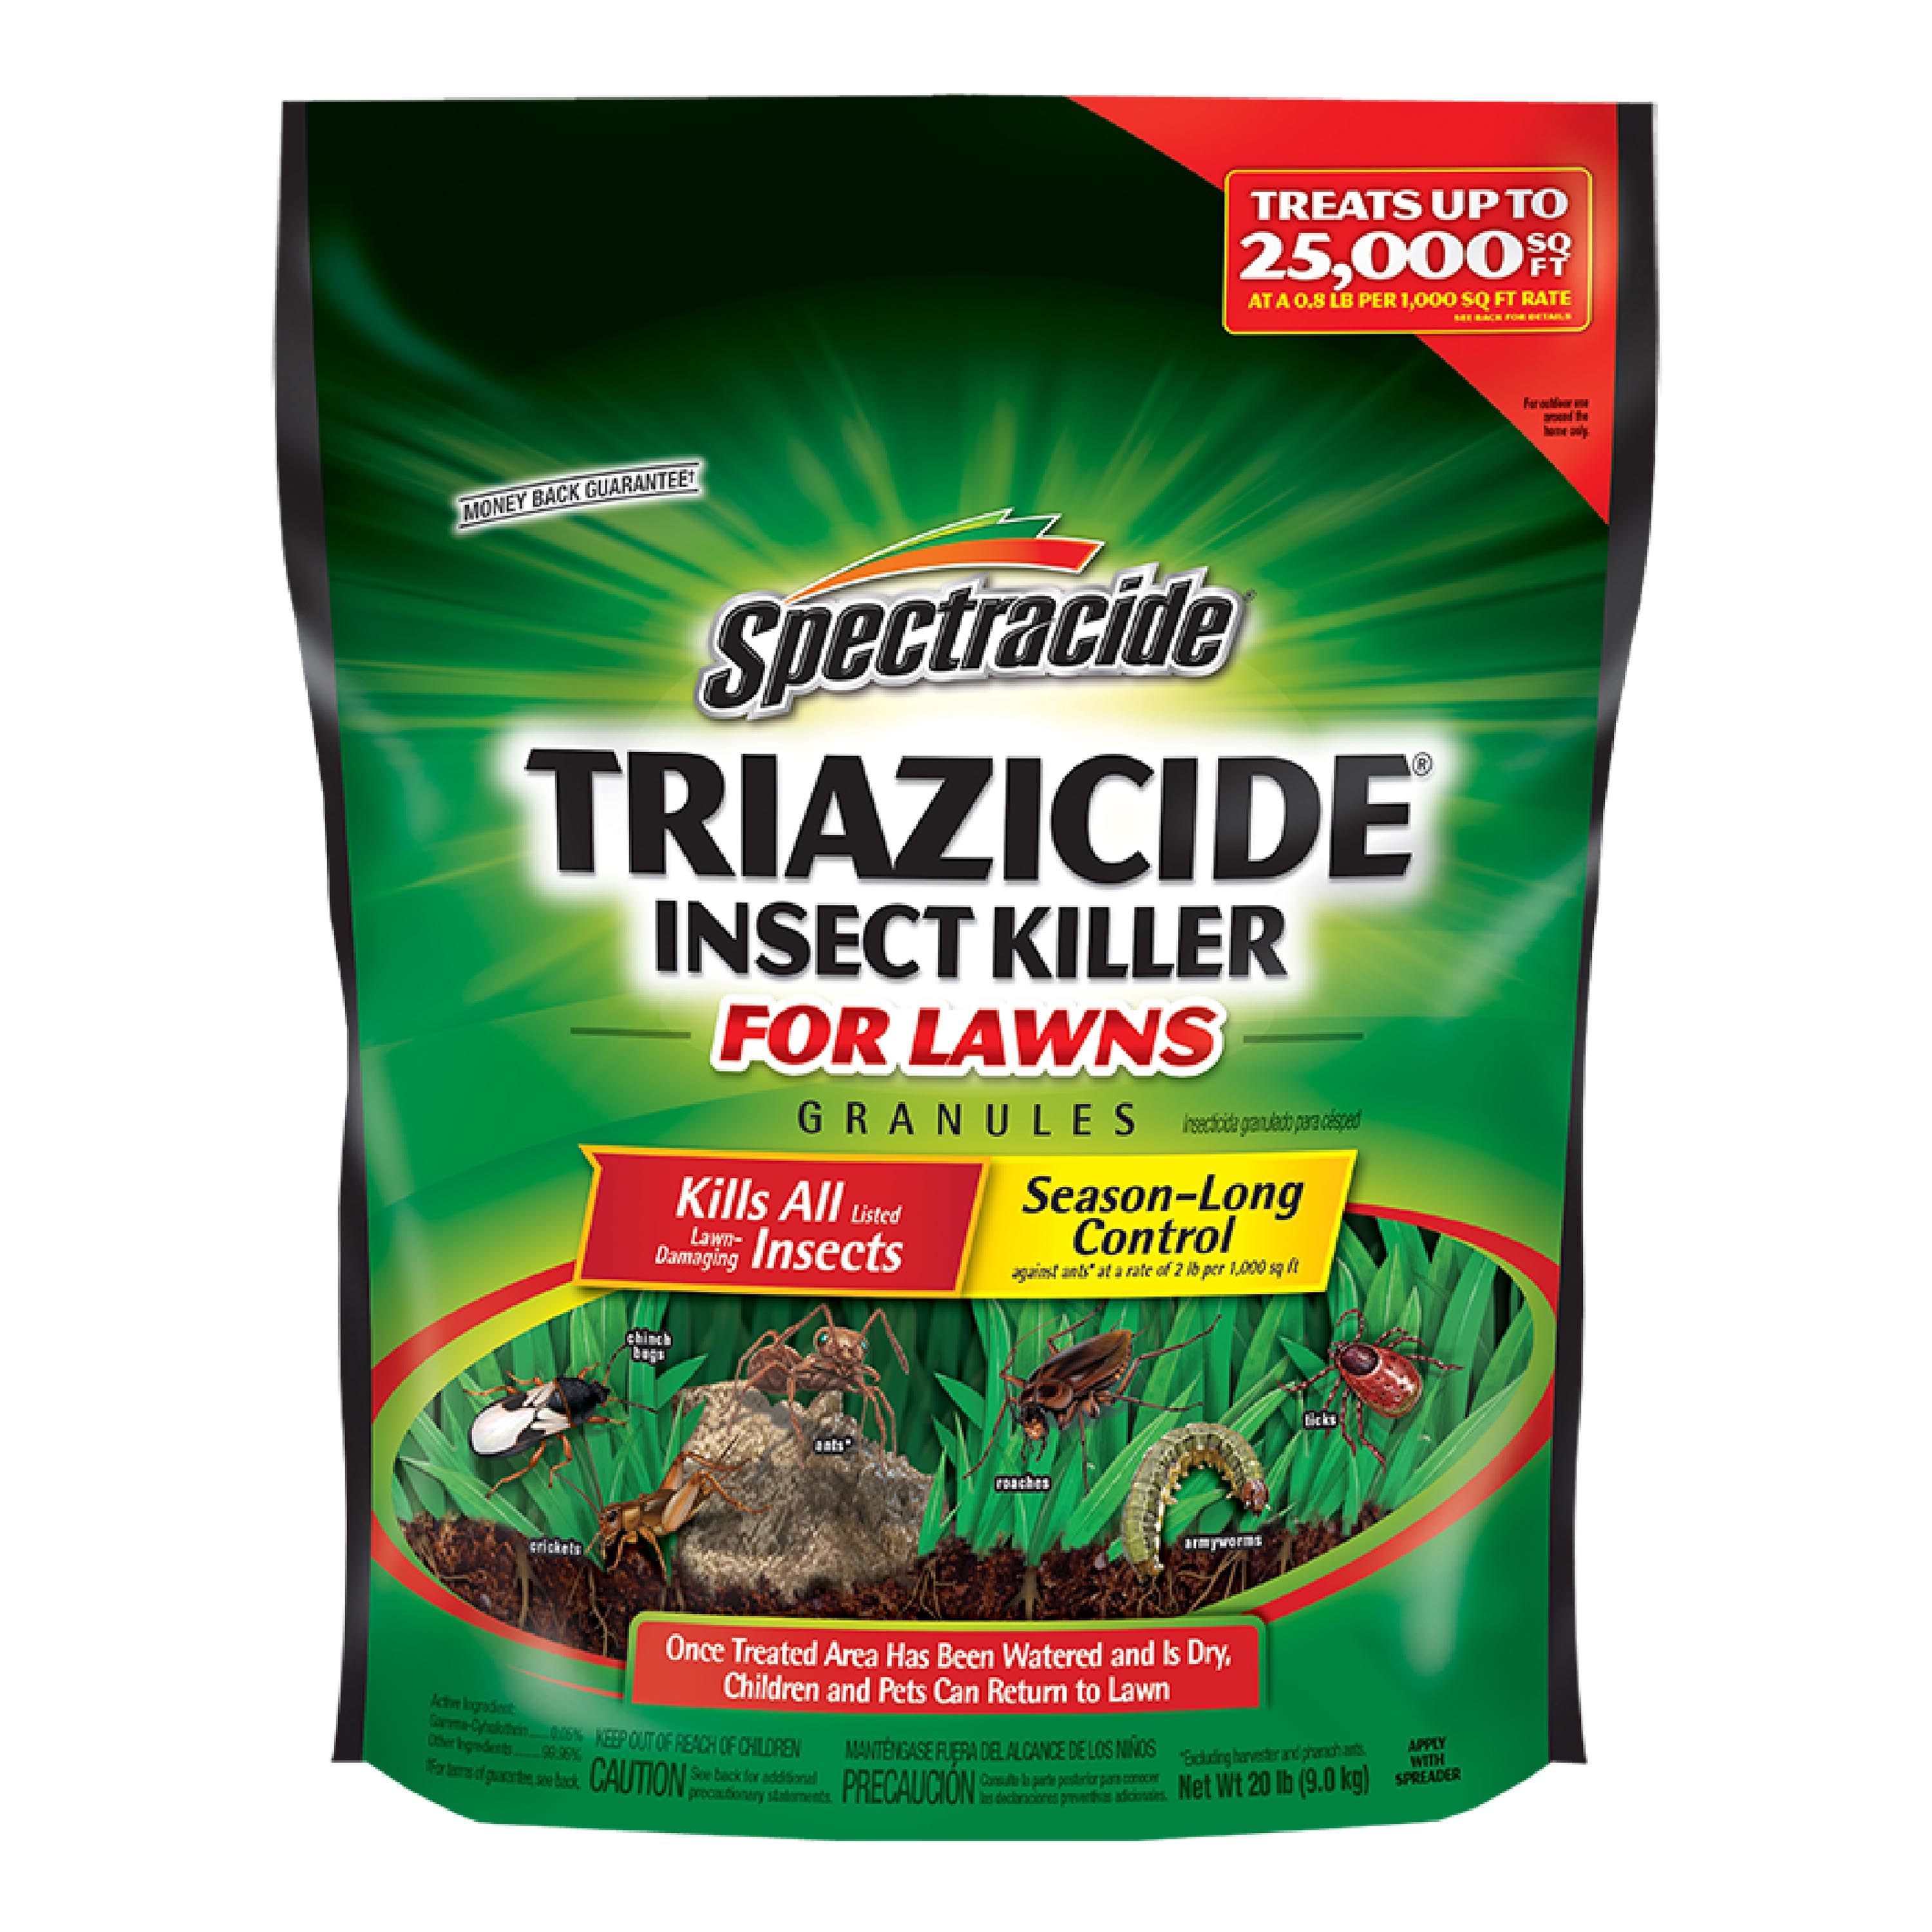 Spectracide Triazicide Insect Killer for Lawns, Granules Kill Listed Lawn-Damaging Insects, 20 lbs. - image 1 of 15